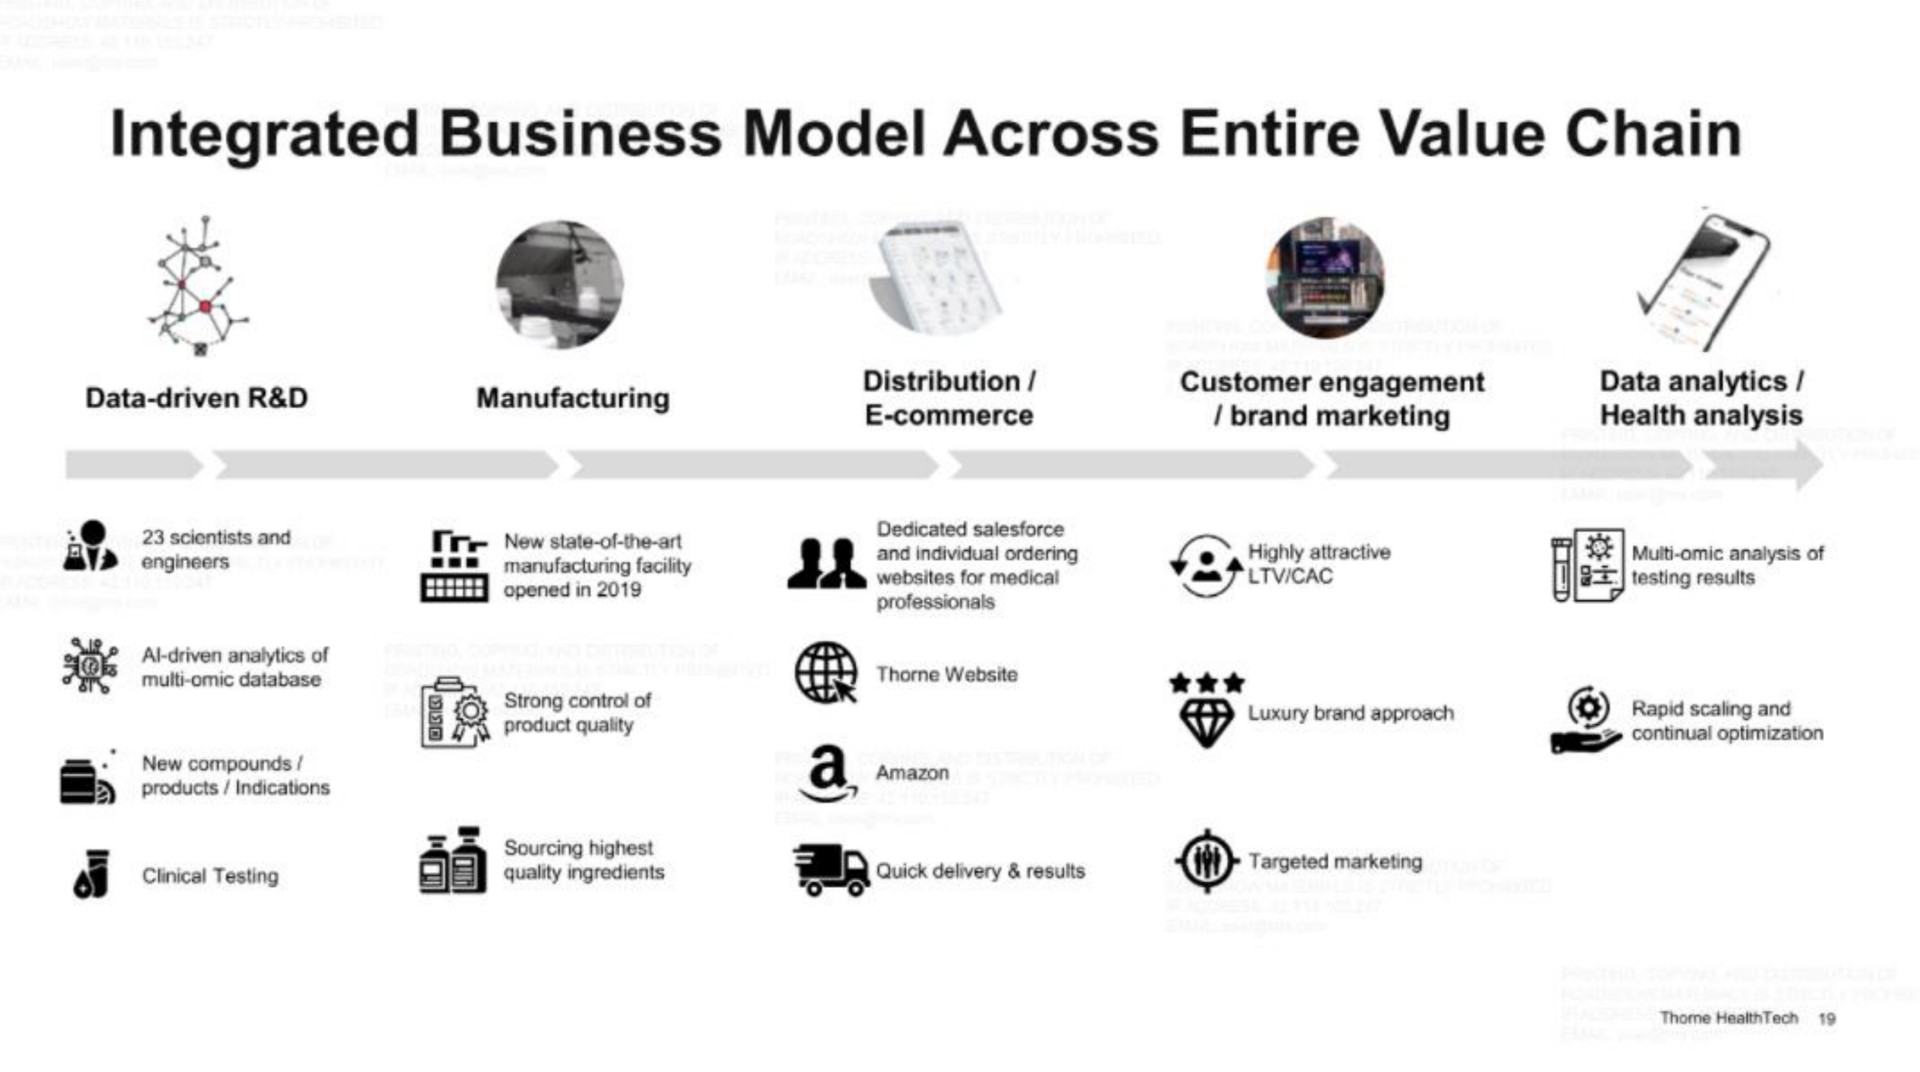 integrated business model across entire value chain a a | Thorne HealthTech